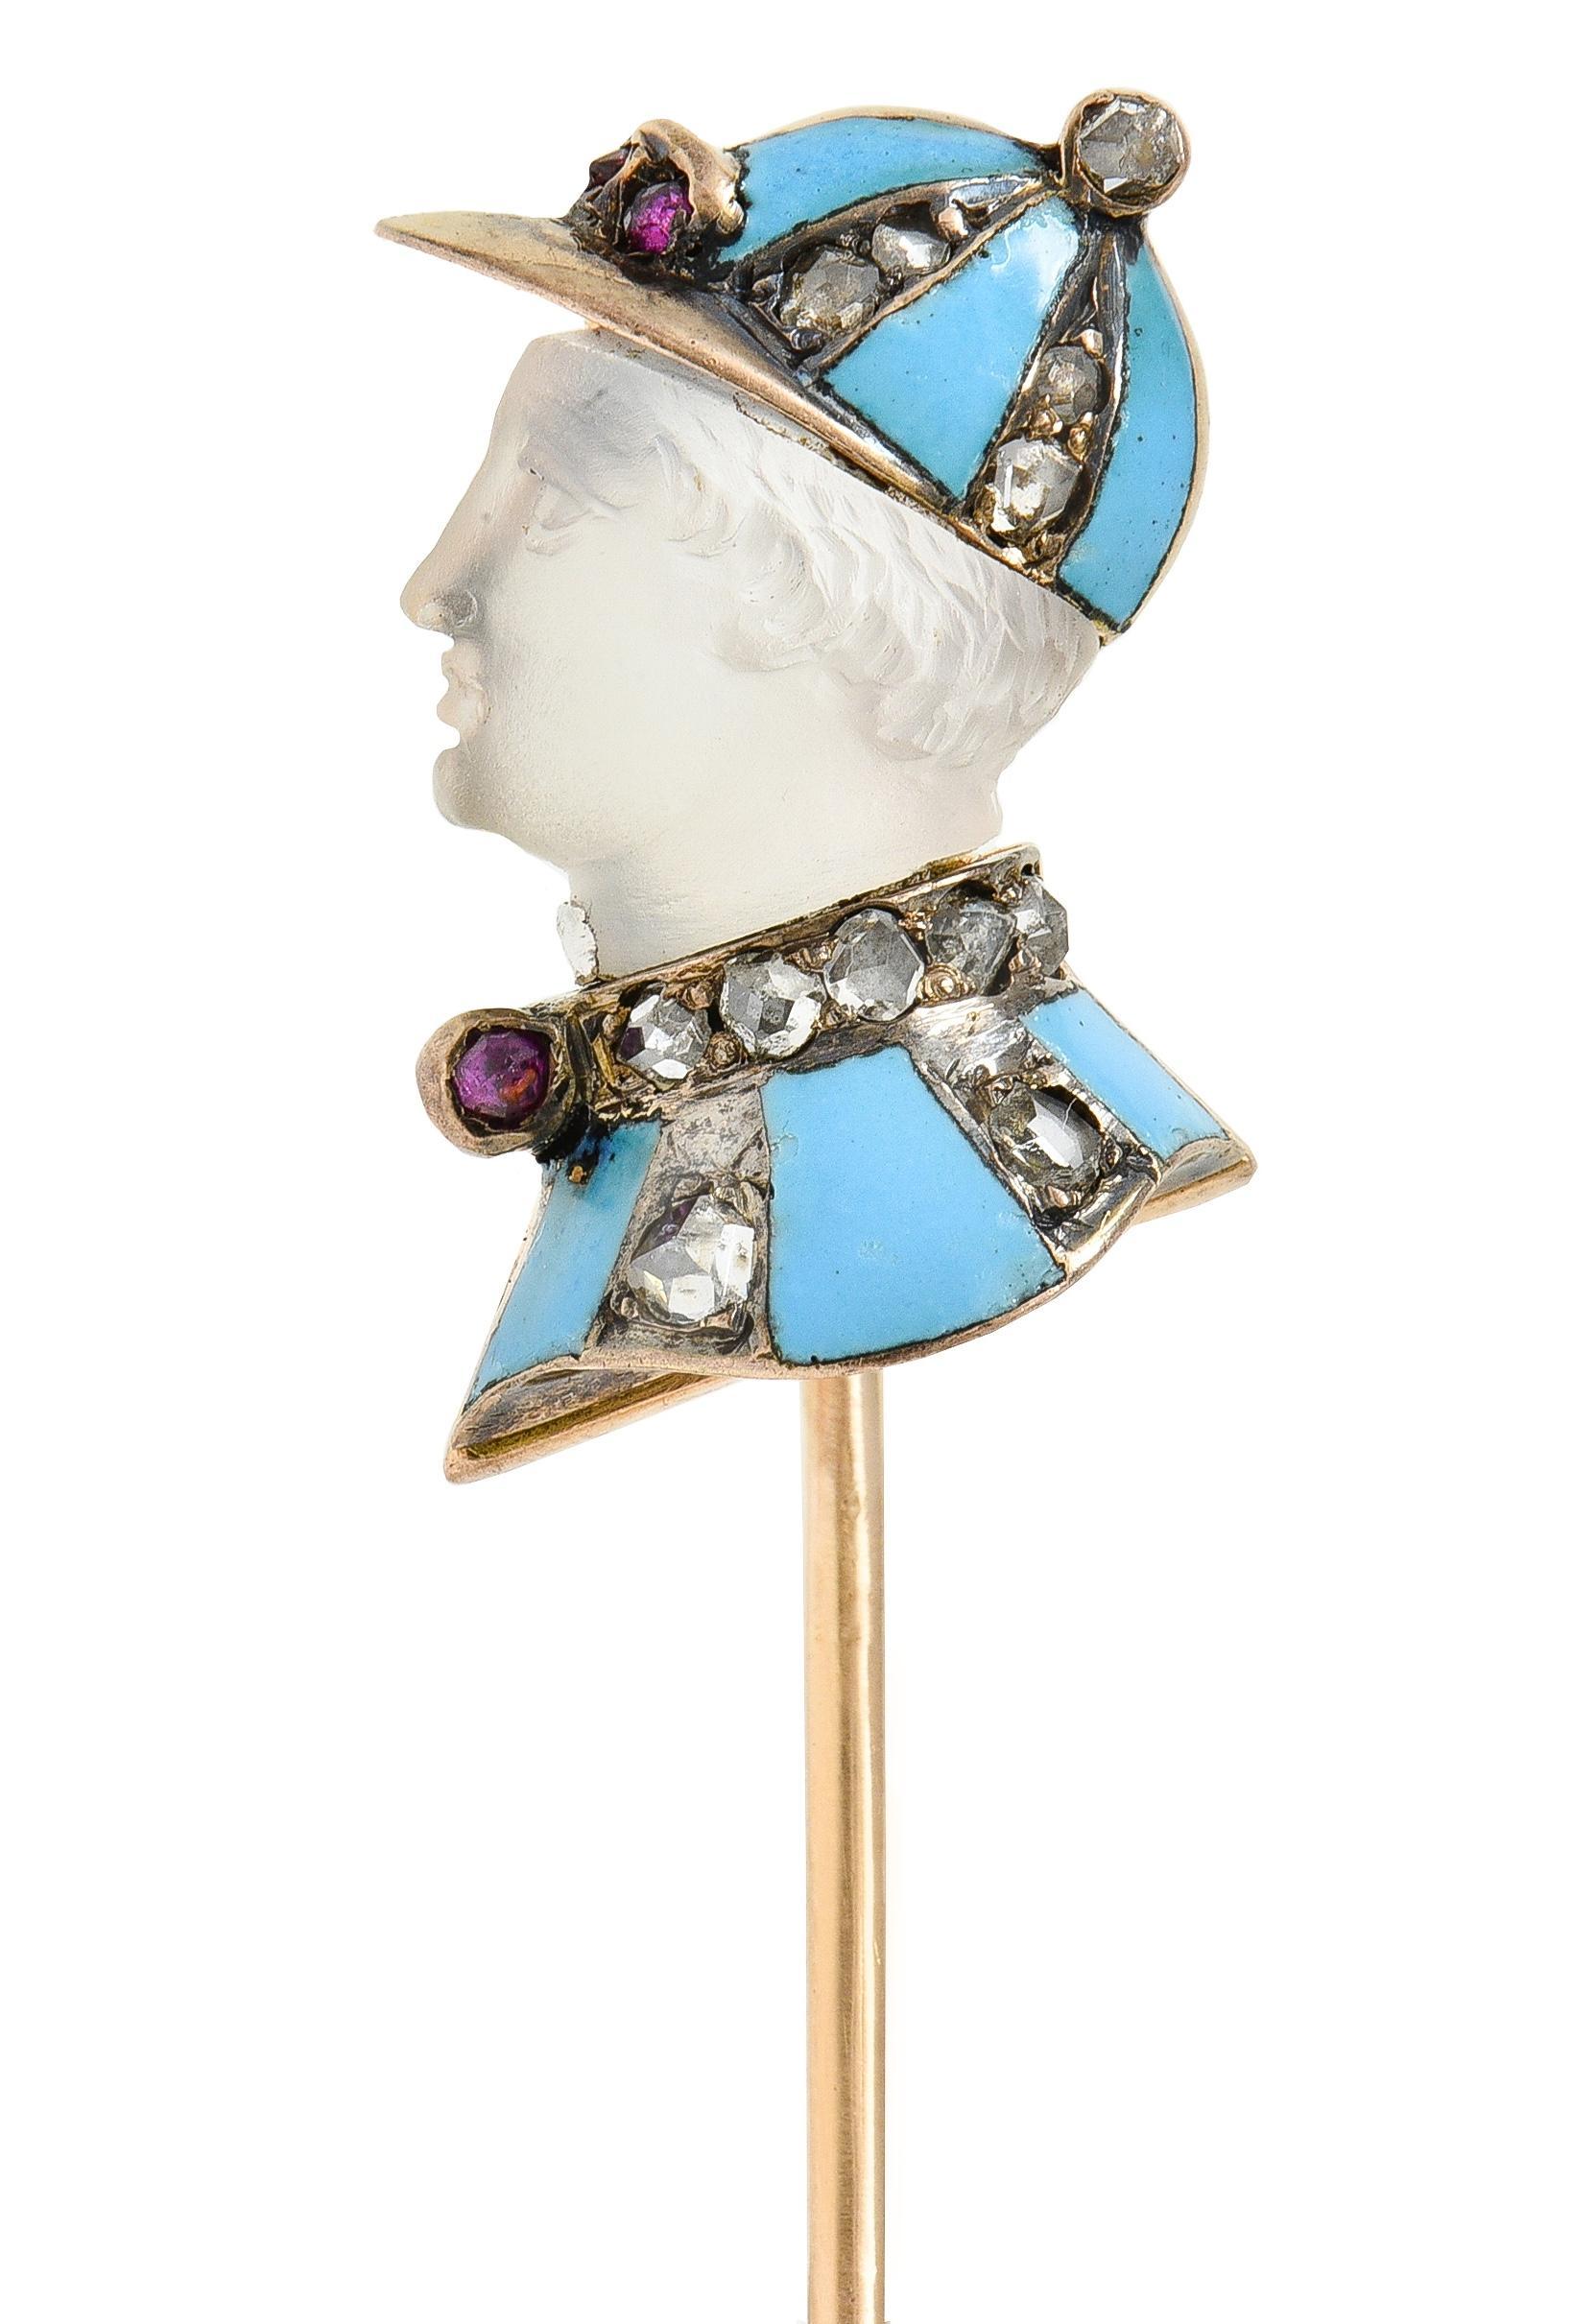 Designed as the profile of an equestrian jockey featuring a carved moonstone face
Measuring approximately 8.0 x 8.5 mm - colorless body with white adularescence
Adorned with matching hat and jacket striped with enamel
Opaque light blue in color -